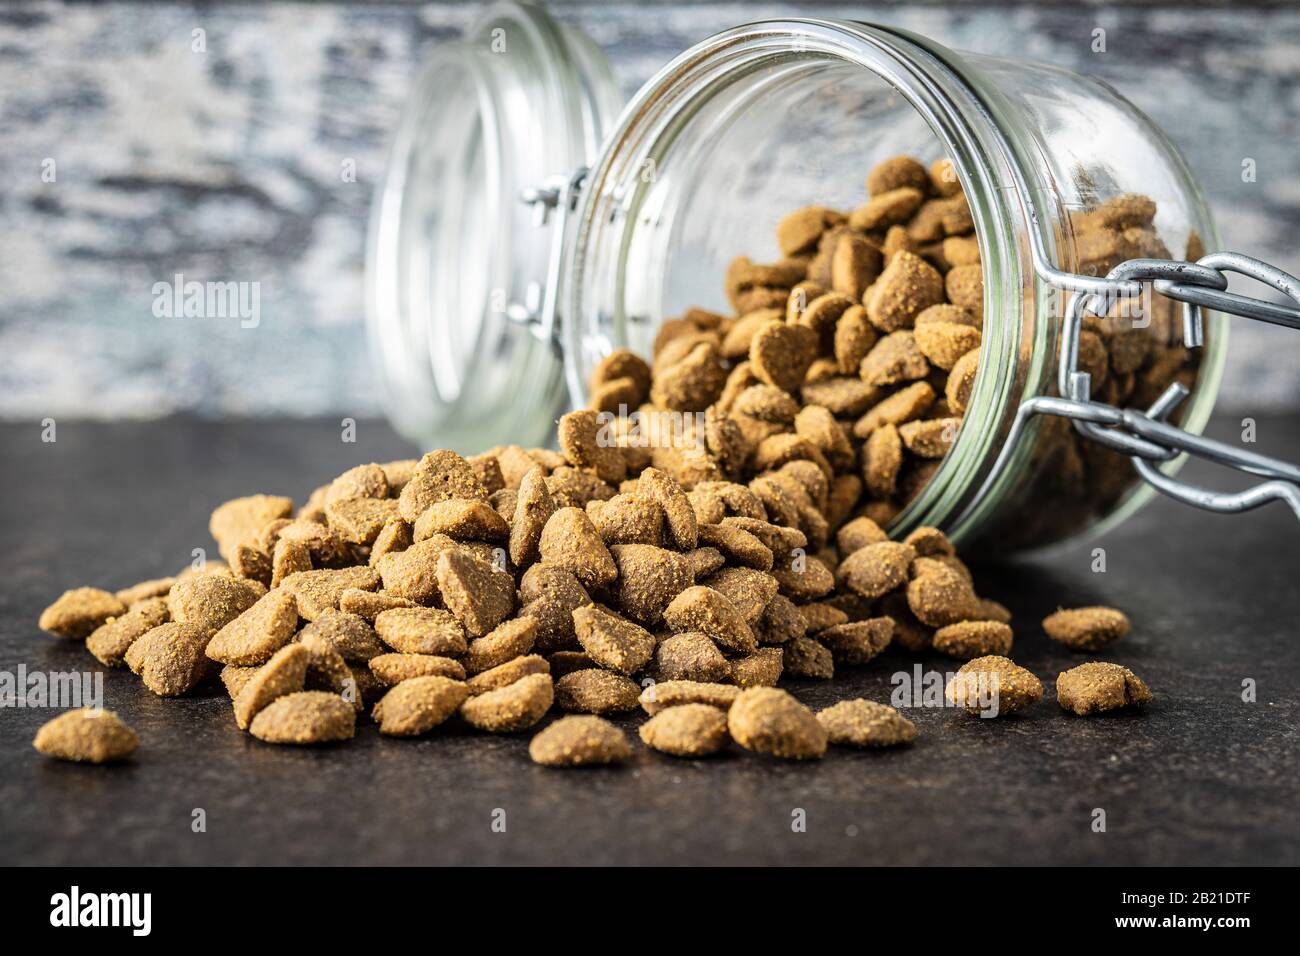 Dried kibble pet food in jar. Heart shape dried animal food on old table. Stock Photo